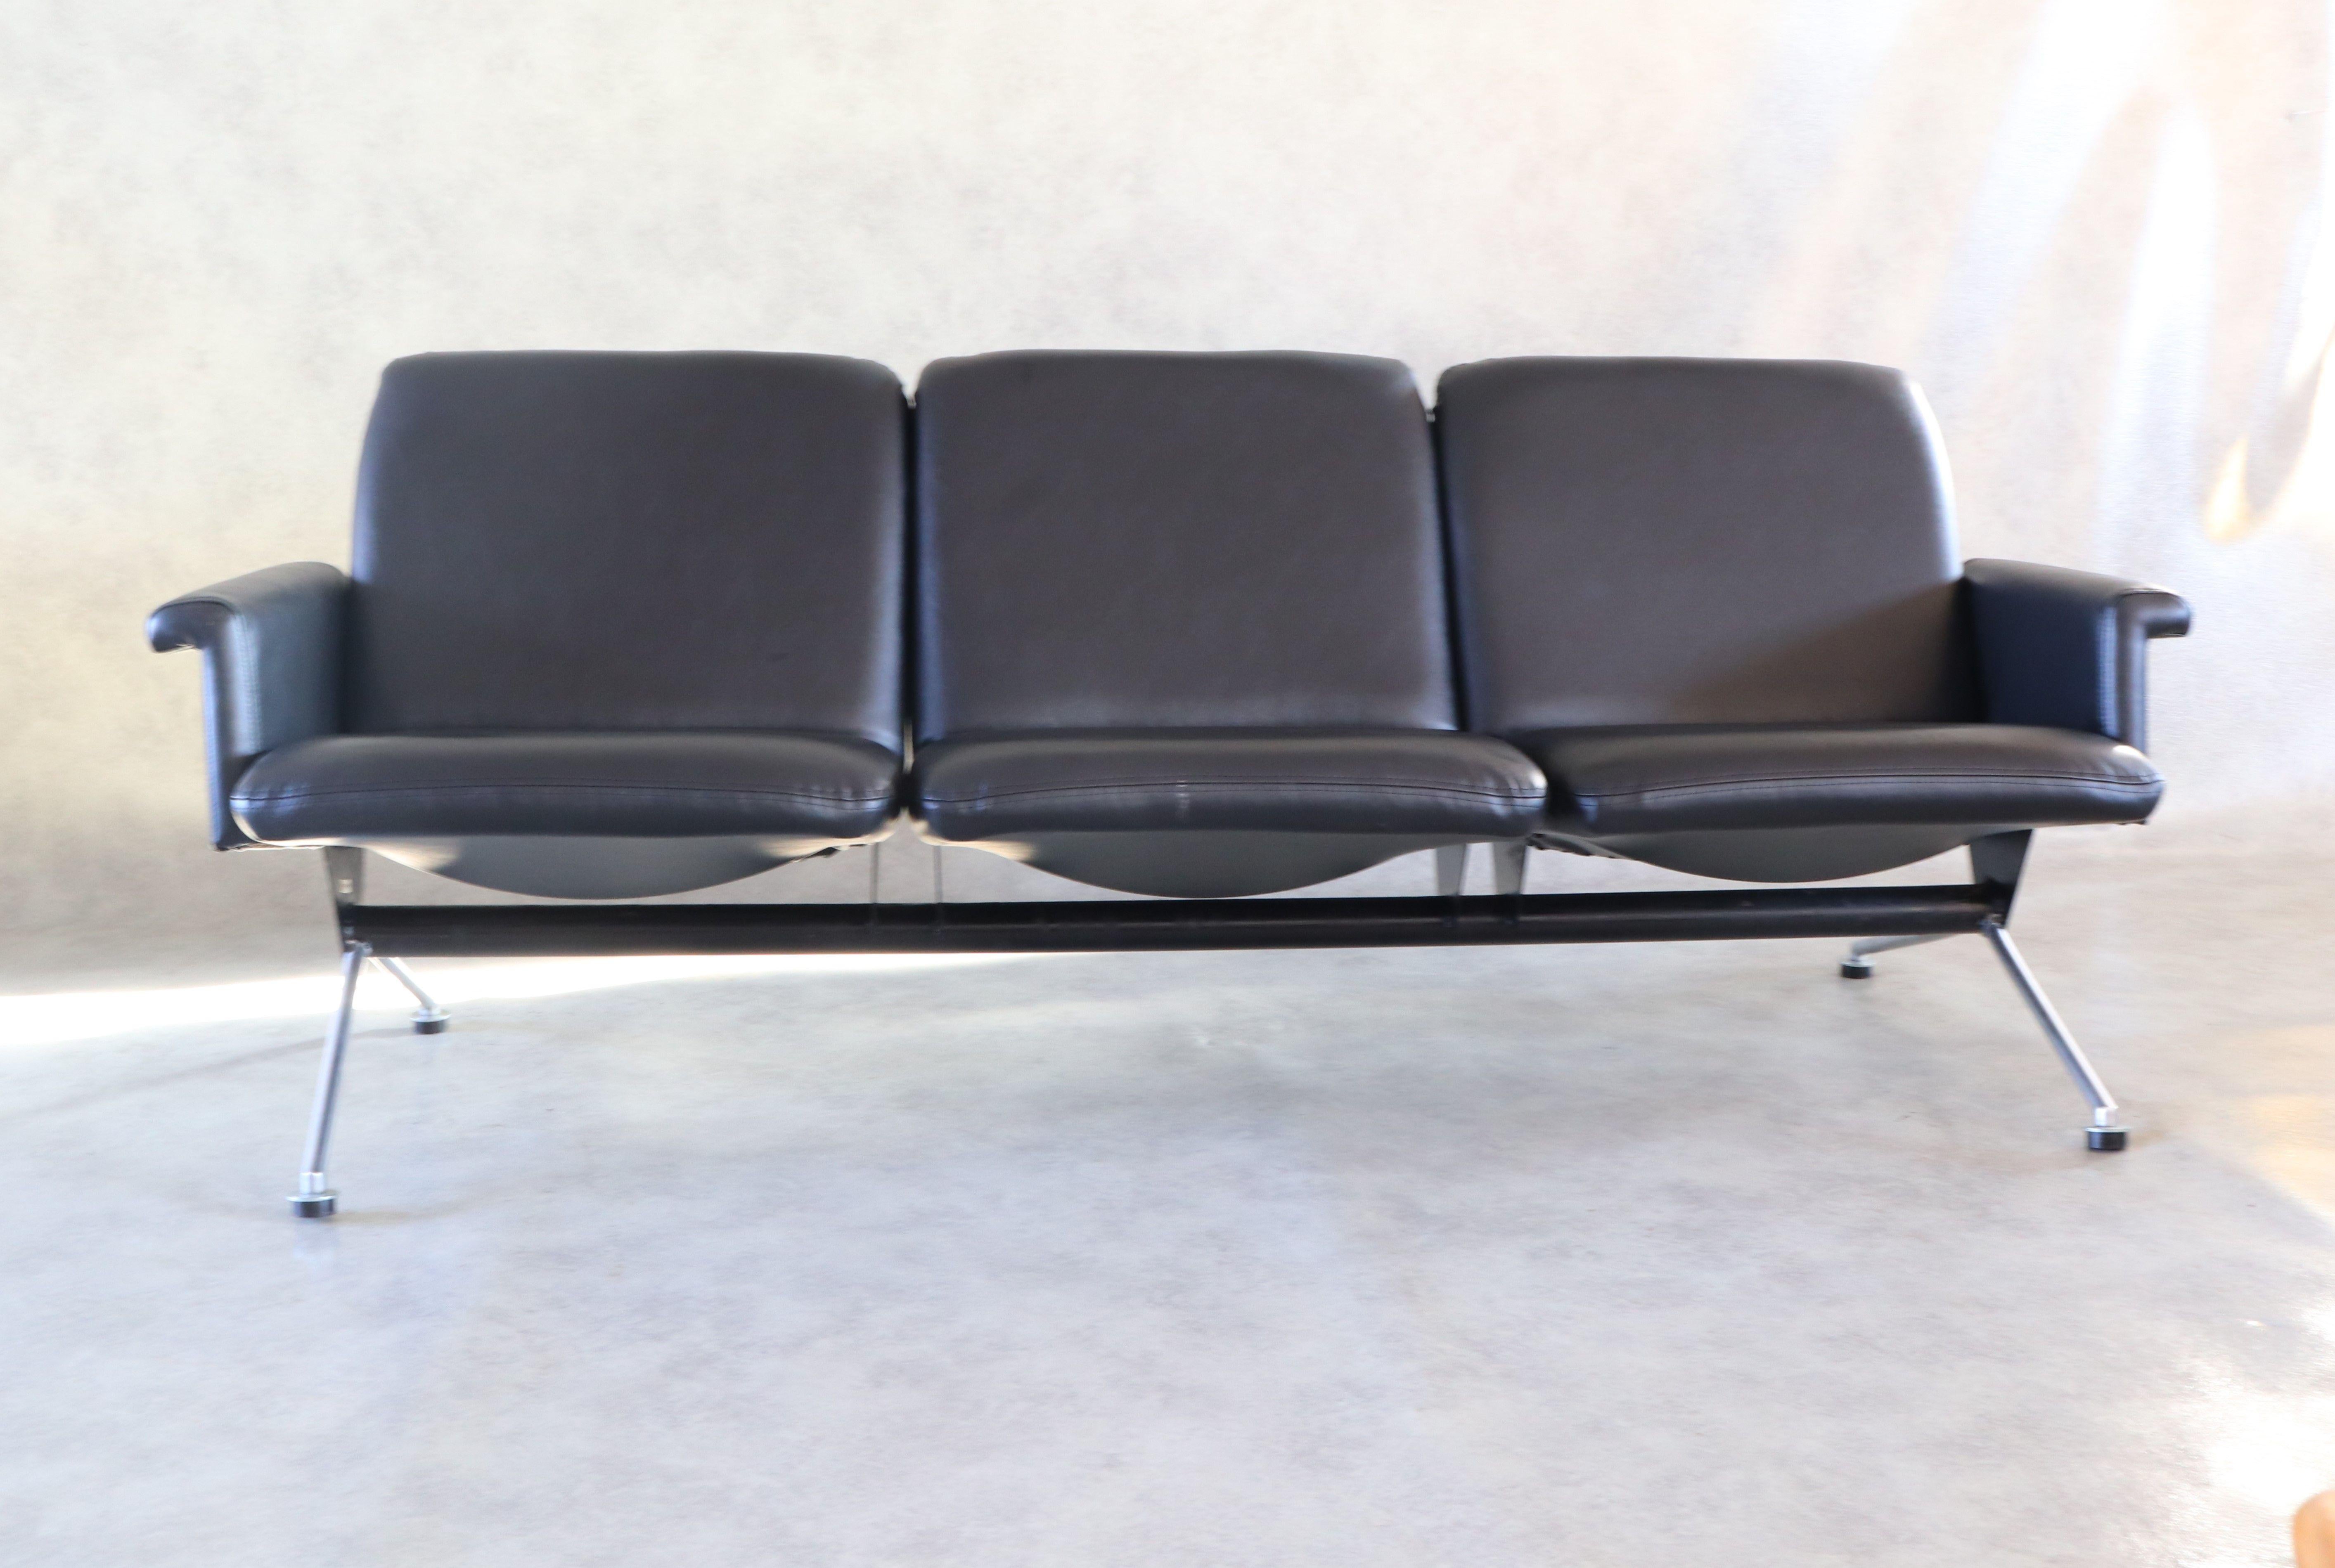 Rare Mid-Century Modern sofa with armrests no. 1715 by Andre Cordemeijer for Gispen, 1961.
Graphite-black lacquered metal frame with chrome-plated legs. Re-upholstered in black faux leather. 
In their brochure, Gispen advertised the sofa's